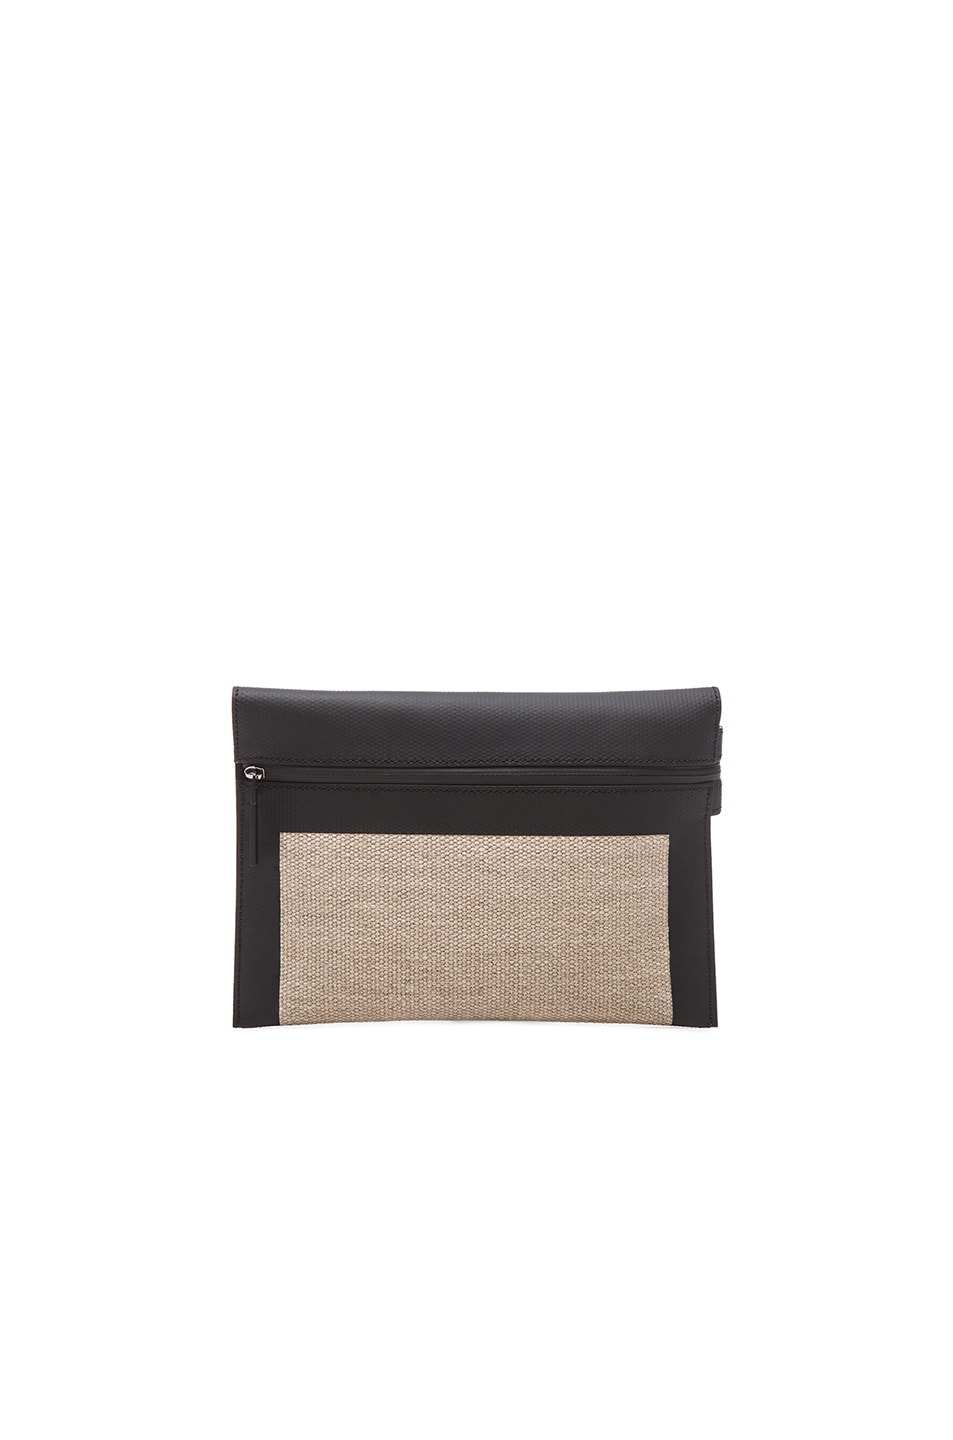 Image 1 of Victoria Beckham Small Zip Pouch in Black Tape